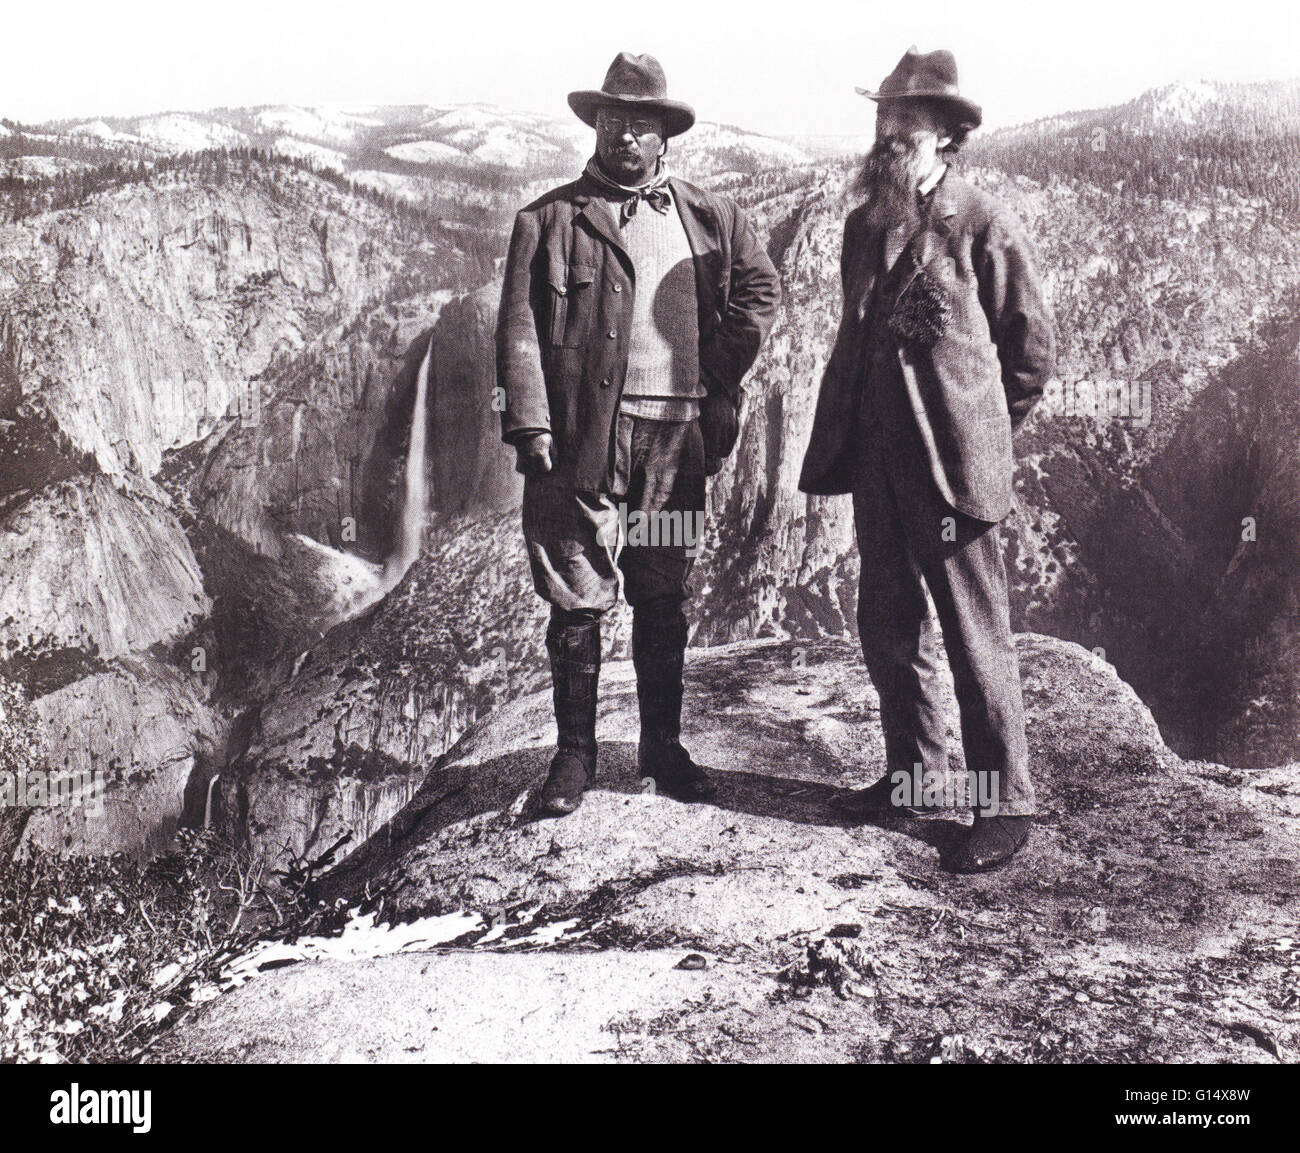 Teddy Roosevelt and John Muir on Glacier Point, Yosemite, 1903. Theodore 'Teddy' Roosevelt (1858-1919) was the 26th President of the United States (19011-1909). He is noted for his exuberant personality, range of interests and achievements, and his leader Stock Photo